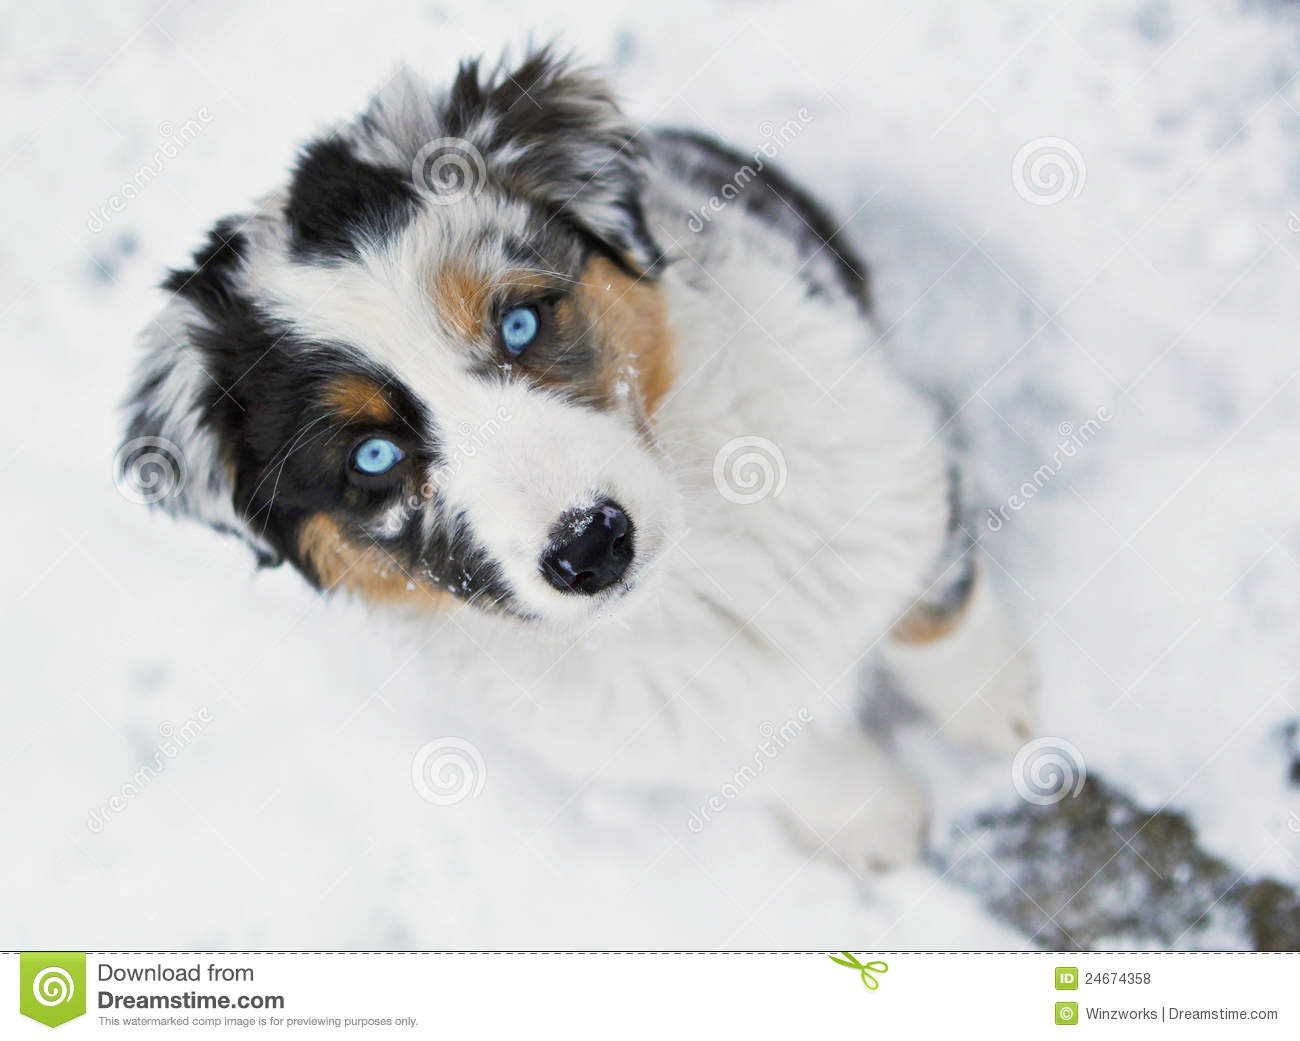 Australian Shepherd Dog With Blue Eyes Sitting On Snow And Looking Up